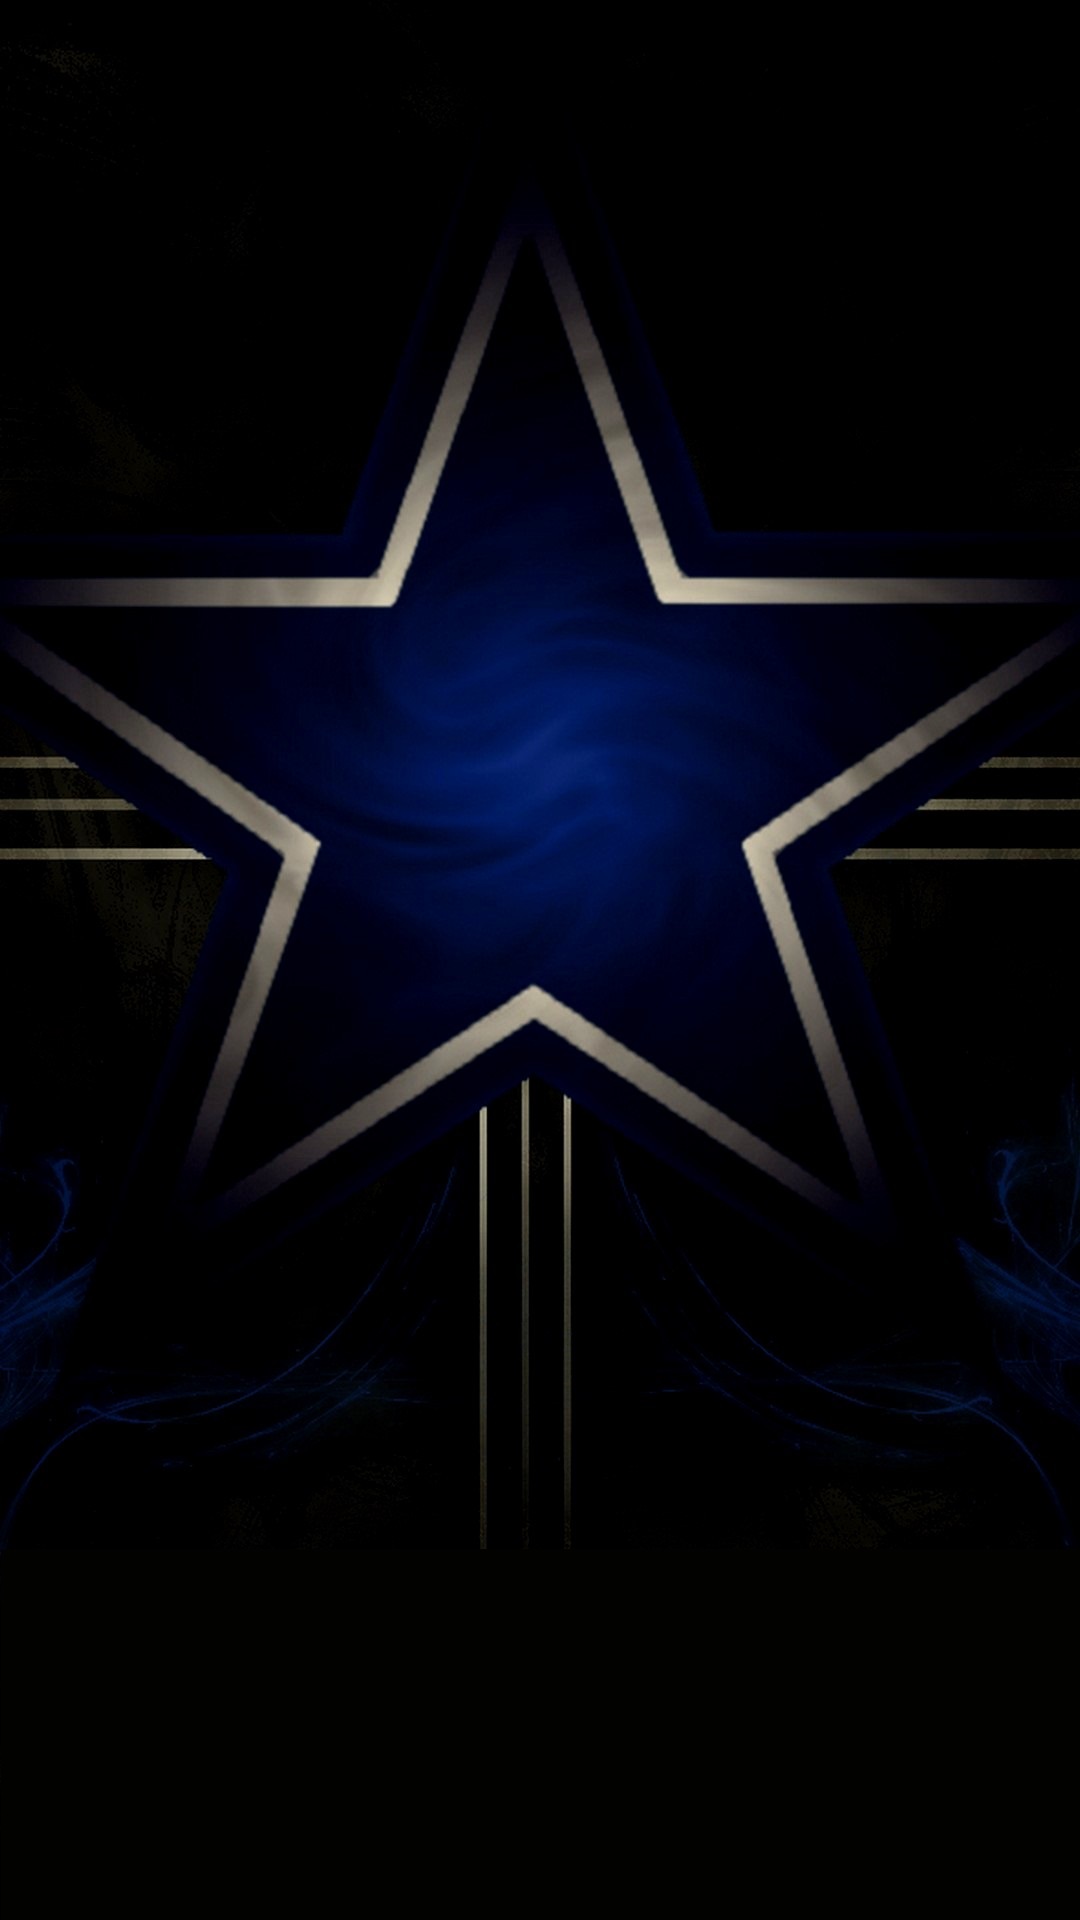 Dallas Cowboys Backgrounds For Android with high-resolution 1080x1920 pixel. You can use this wallpaper for your Android backgrounds, Tablet, Samsung Screensavers, Mobile Phone Lock Screen and another Smartphones device